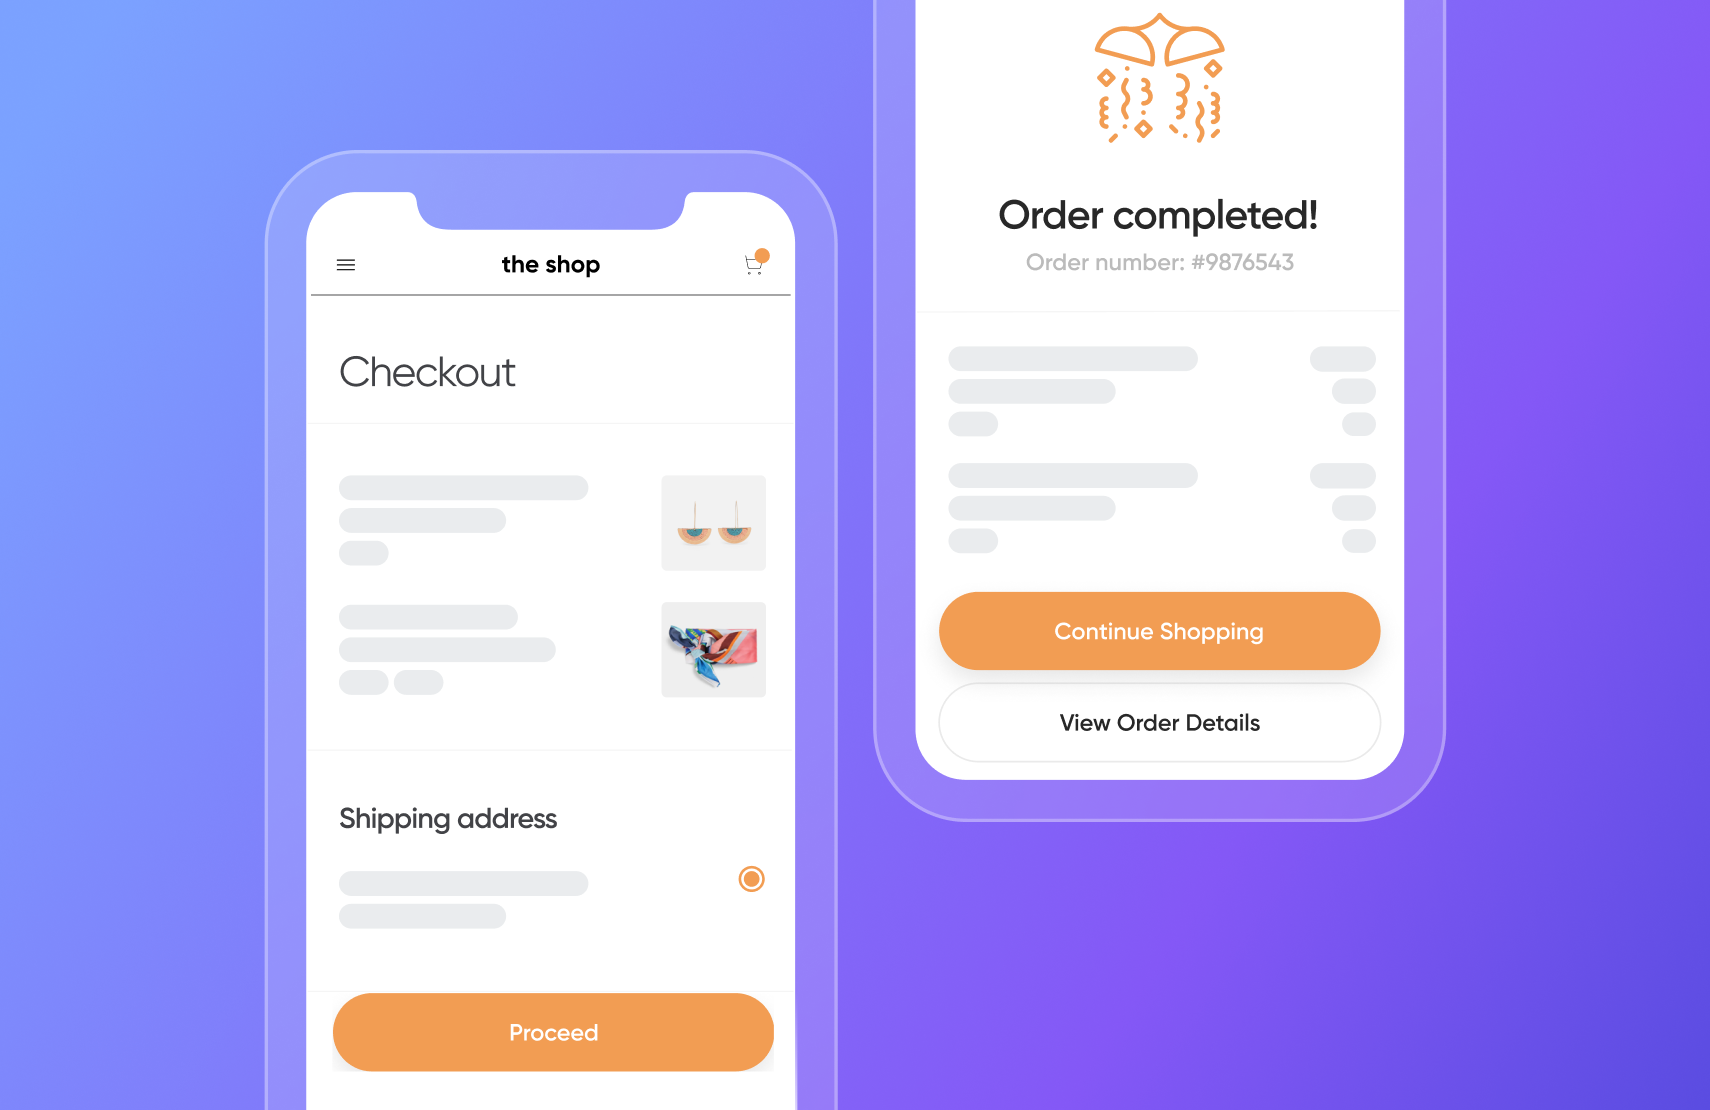 What Components are Key to a Great Checkout Experience?